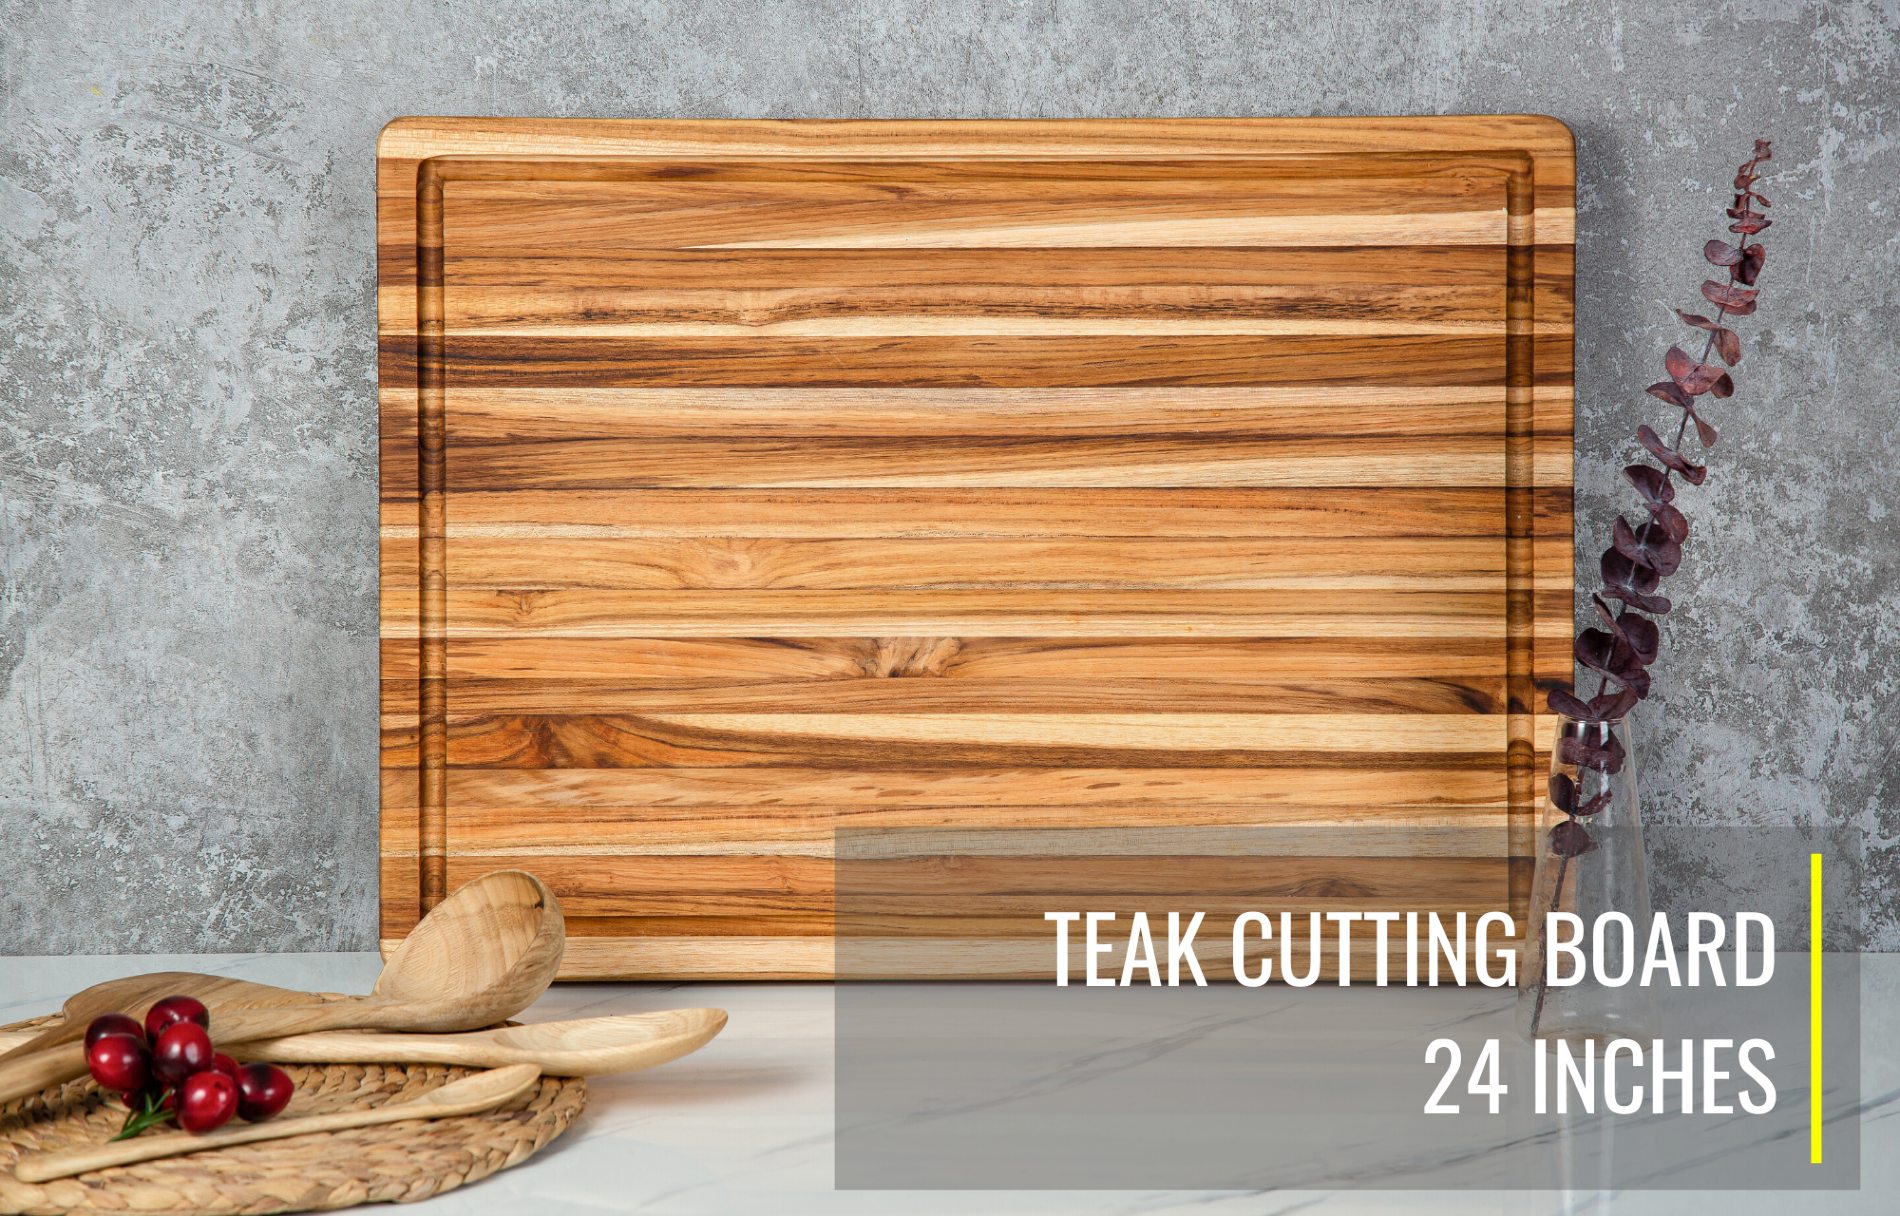 BEEFURNI Teak Wood Cutting Board with Juice Groove Hand Grip, Small Wooden  Cutting Boards for Kitchen, Chopping Board Wood, Kitchen Gifts, 1-Year